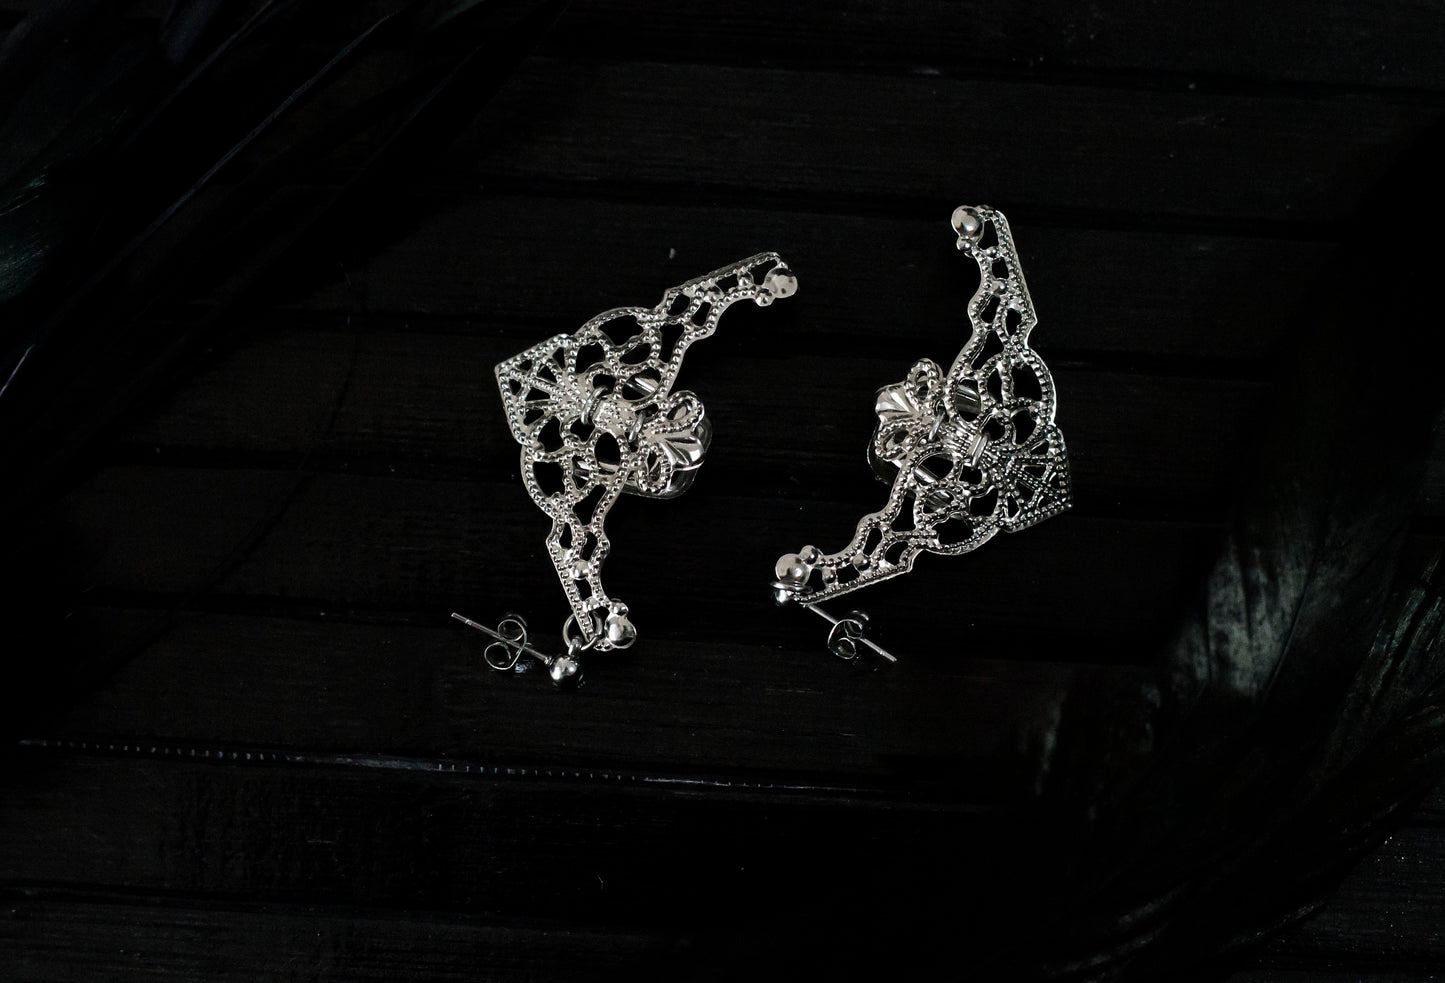 Presenting Myril Jewels' intricate cuff earrings, a masterpiece of neo-gothic design. These silver earrings feature an ornate, web-like pattern with a central floral motif, embodying the gothic-chic aesthetic. They dangle gracefully, perfect for adding a touch of whimsigoth elegance to any ensemble. Ideal for those who favor dark-avantgarde accessories, they're versatile for daily wear or as a highlight for rave party attire, encapsulating the essence of festival jewels with a witchcore twist.